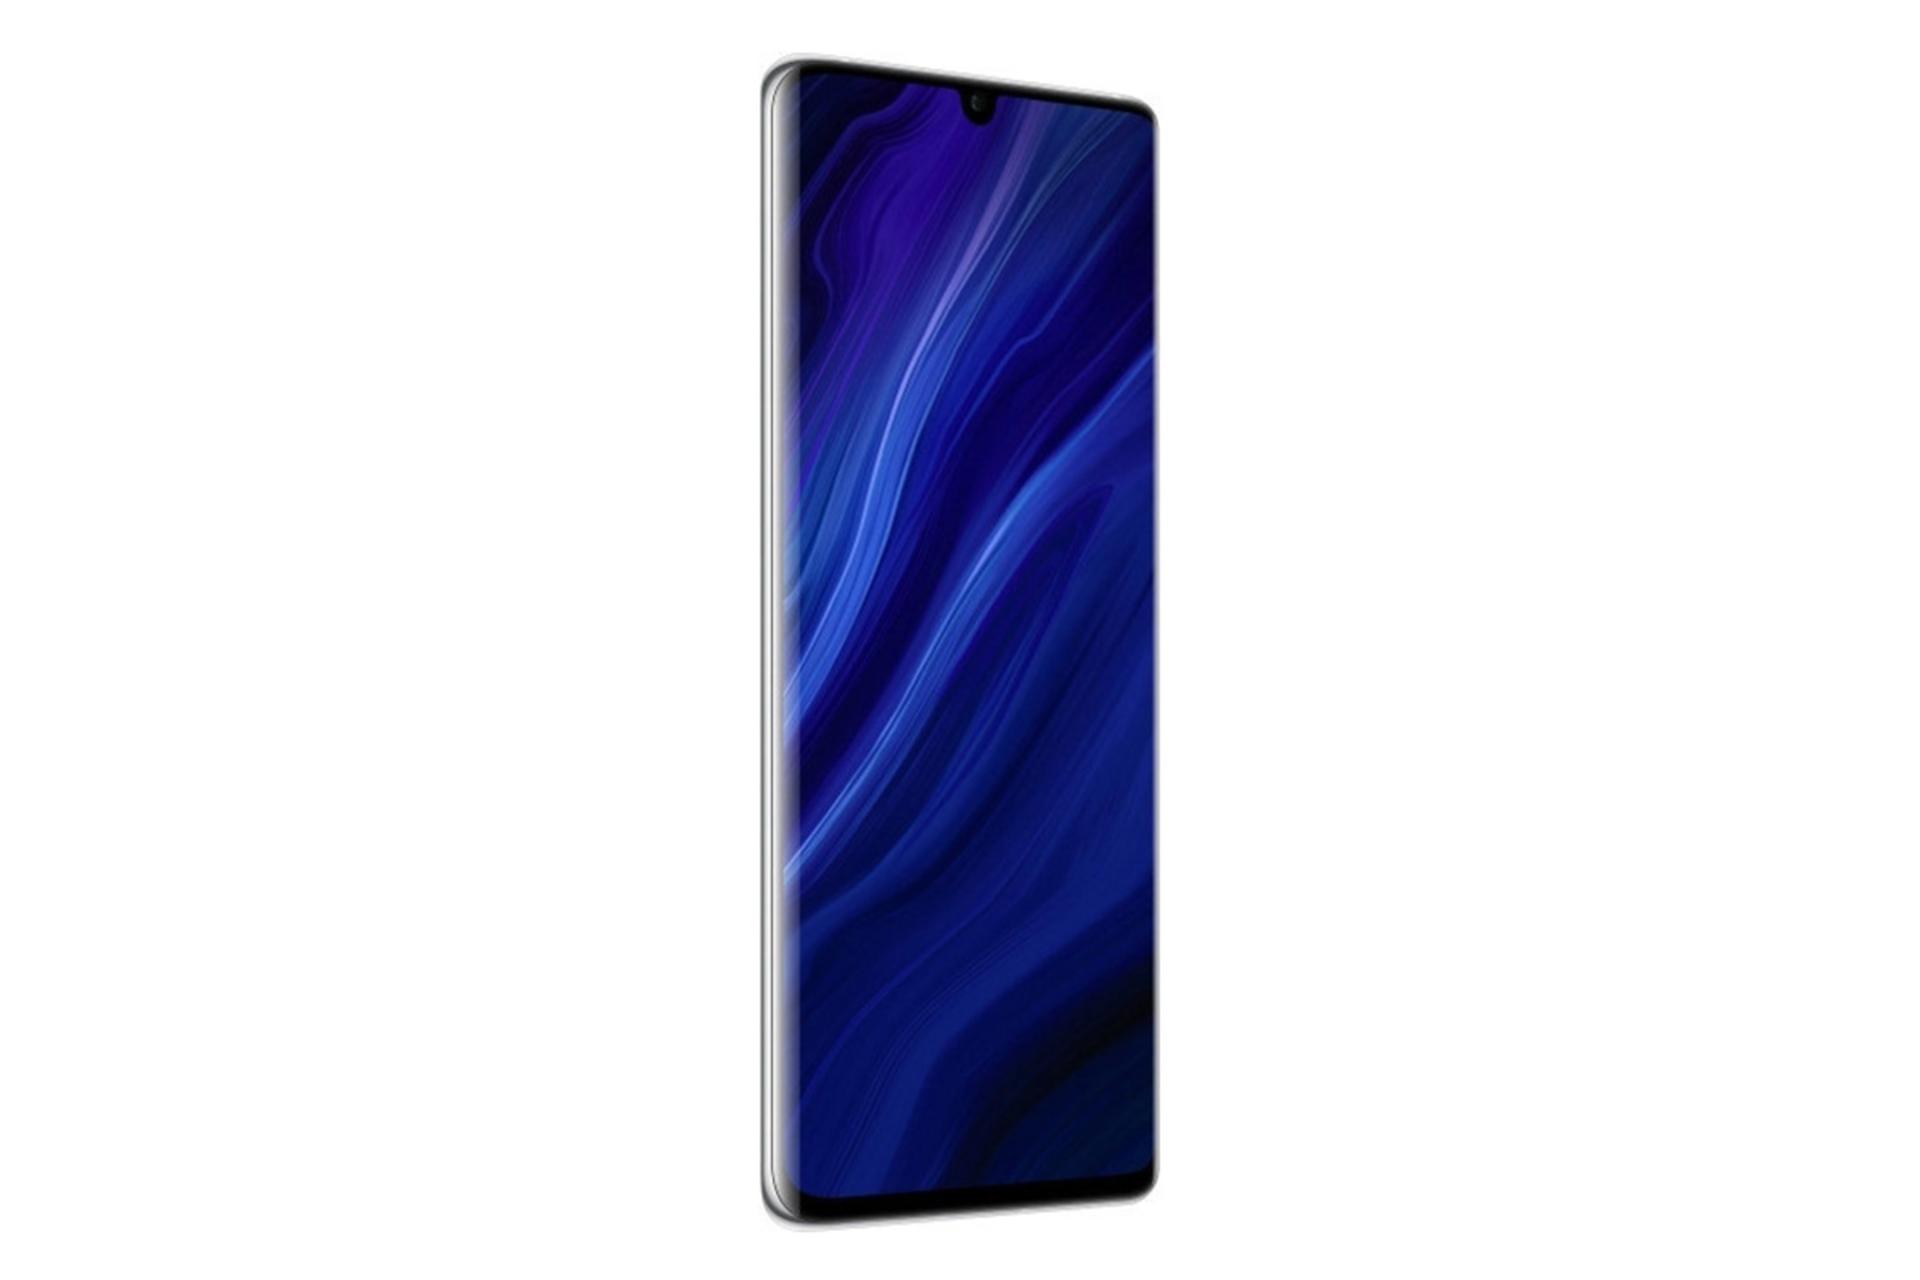 Huawei P30 ProNew Edition / هواوی پی 30 پرو نیو ادیشن